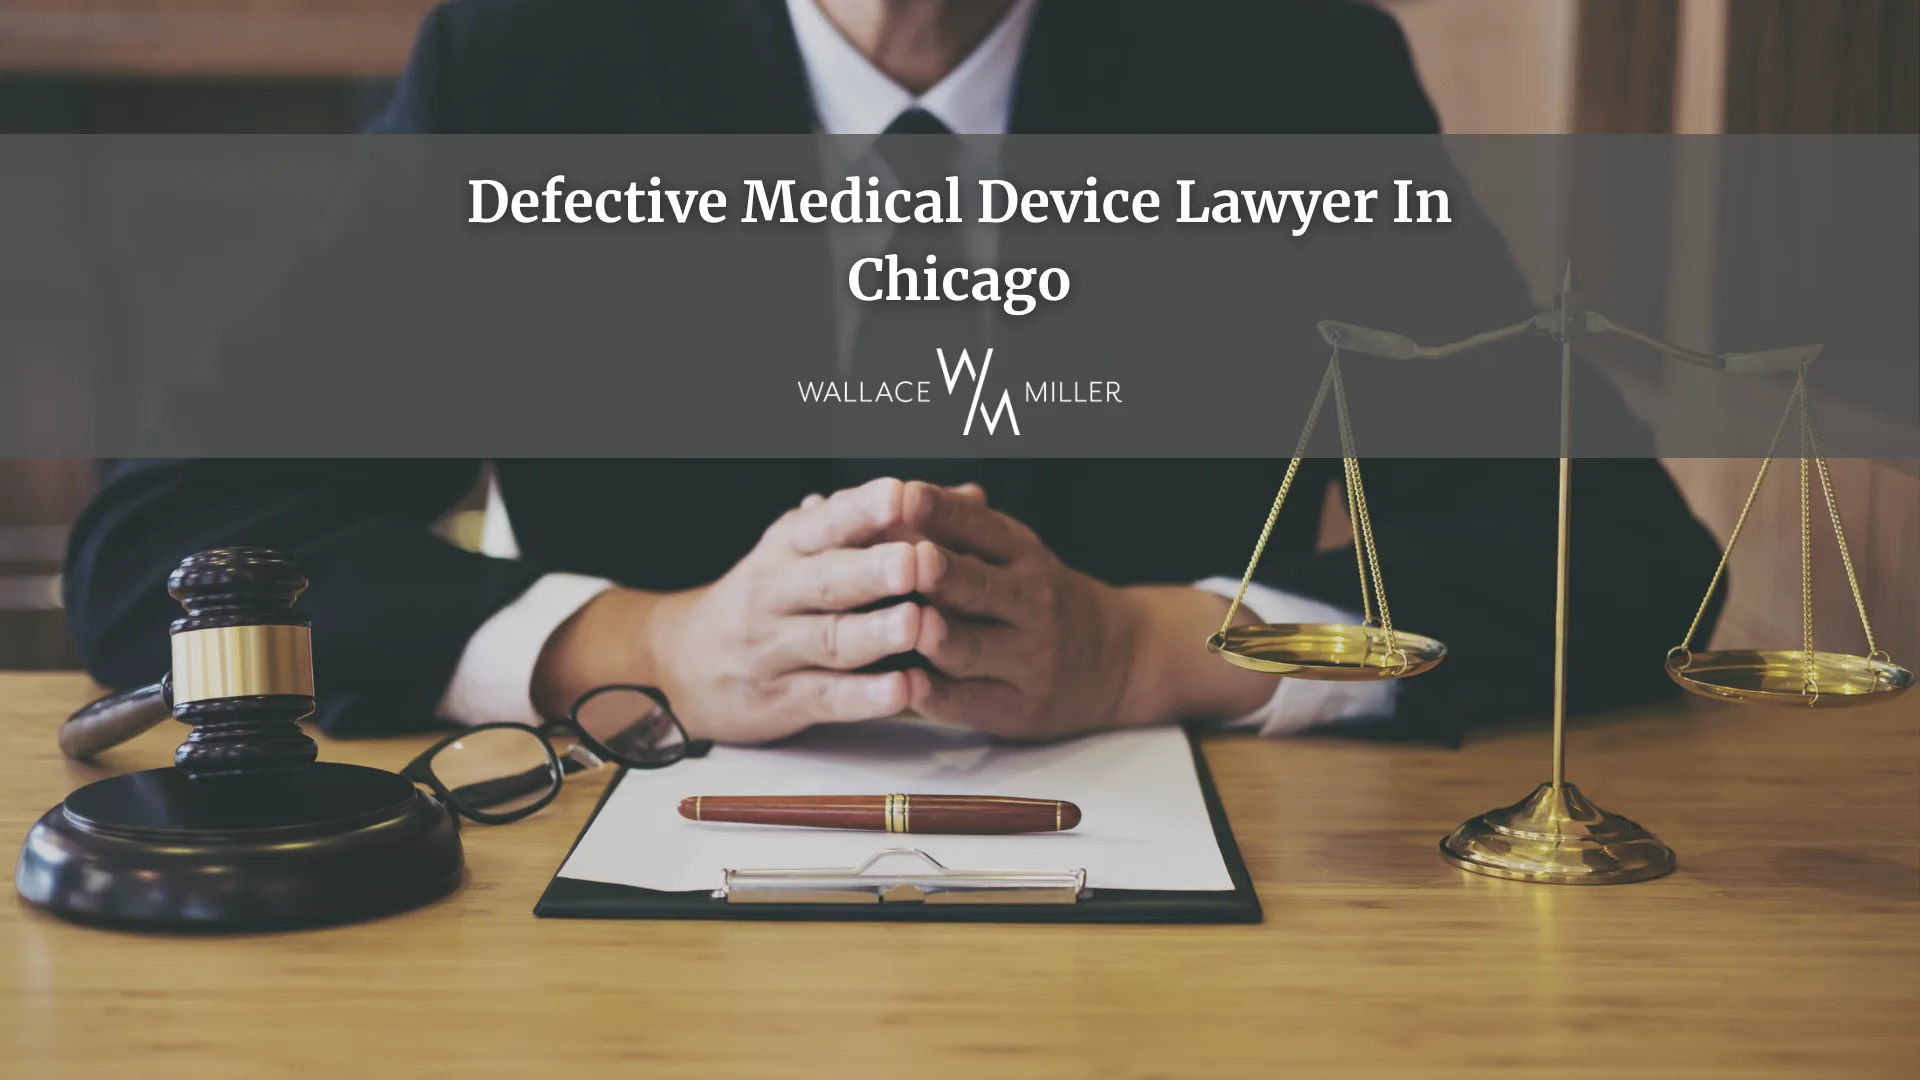 Defective Medical Device Lawyer In Chicago